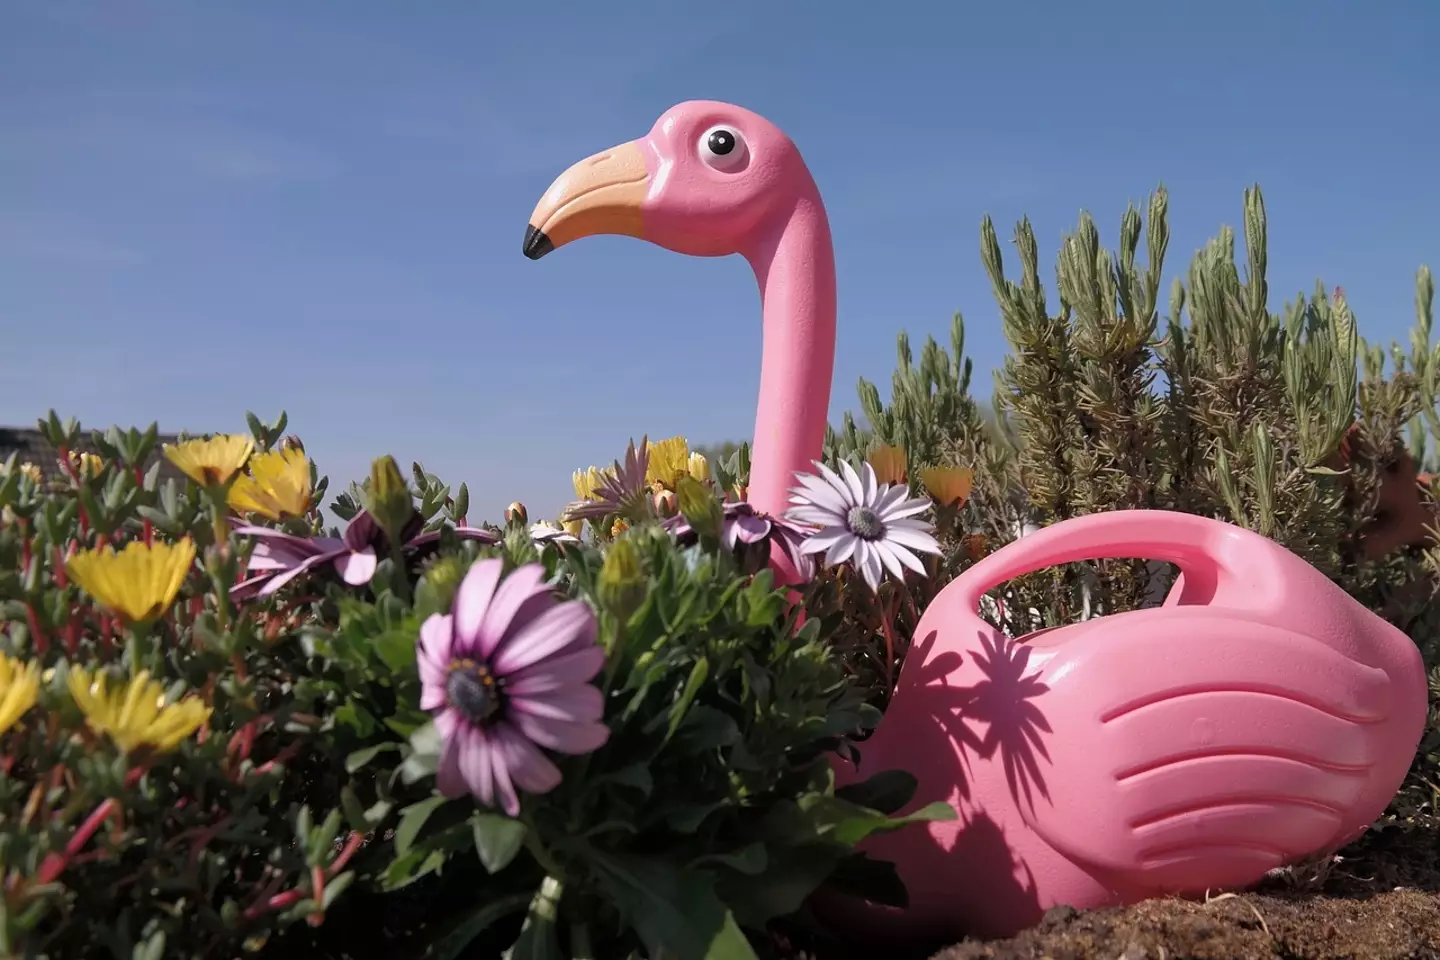 Garden flamingos and pampas grass are also assumed to indicate you are into swinging.